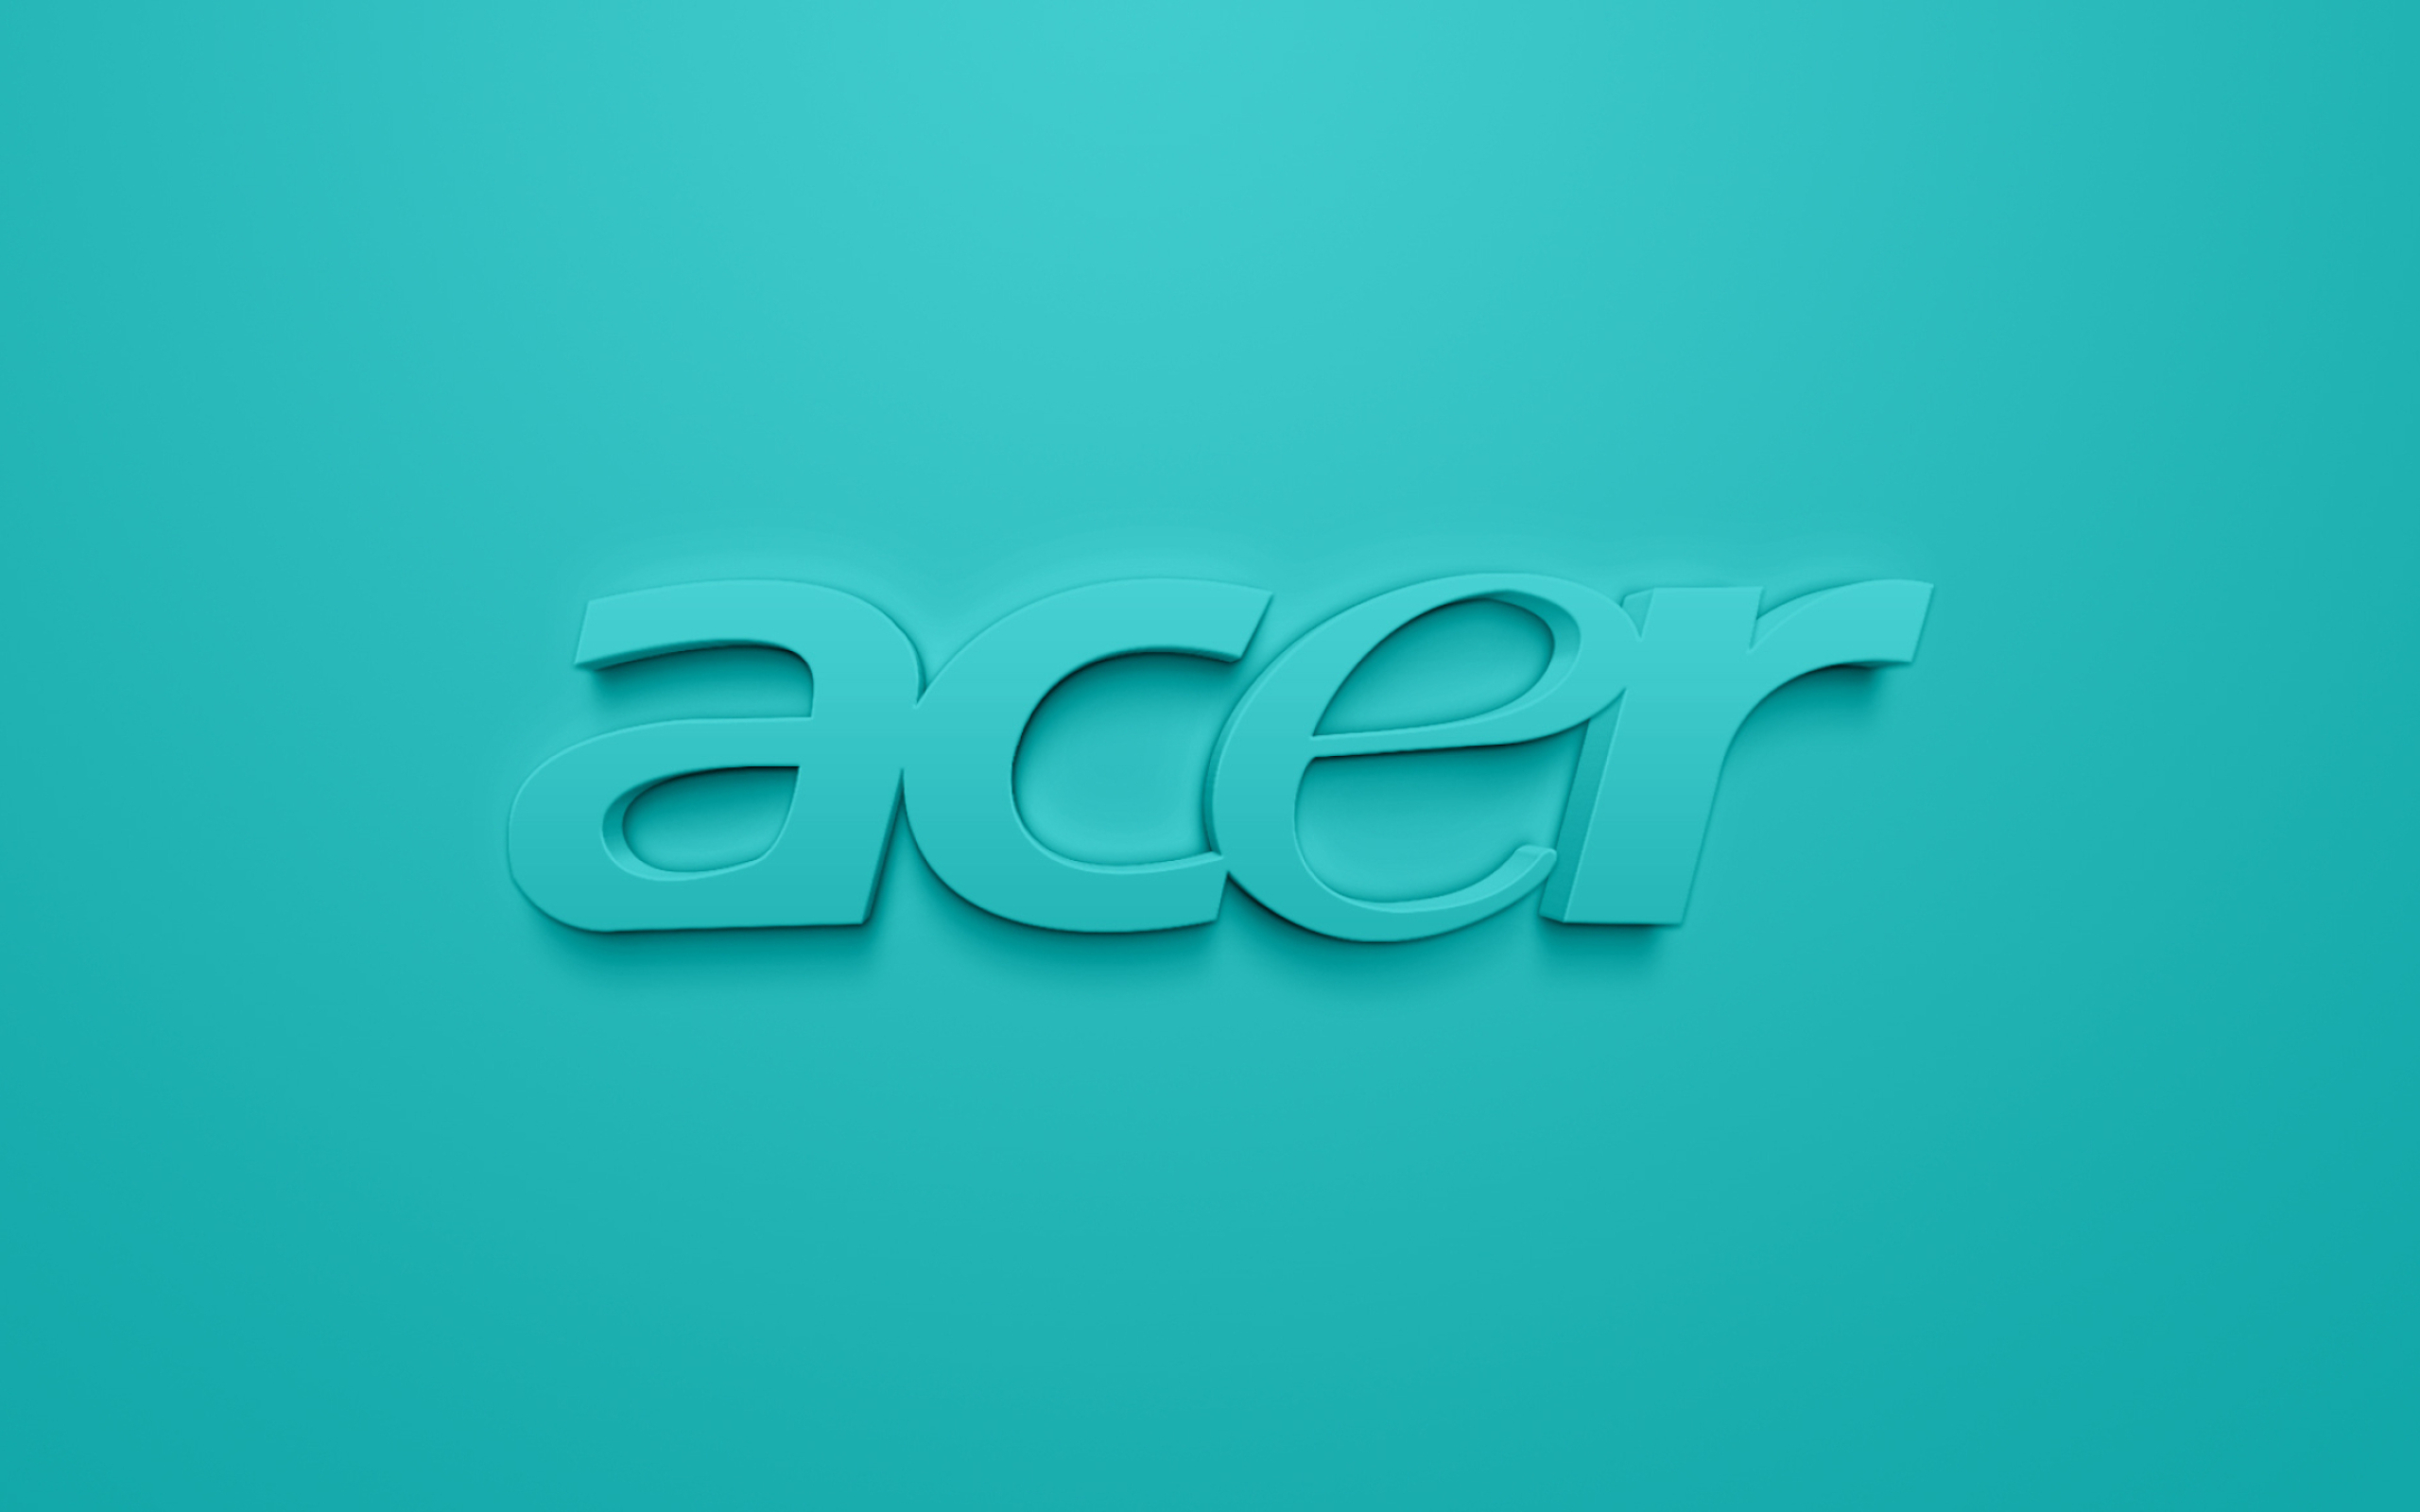 Acer logo wallpapers, Turquoise background, 3D art, High-quality pictures, 2560x1600 HD Desktop